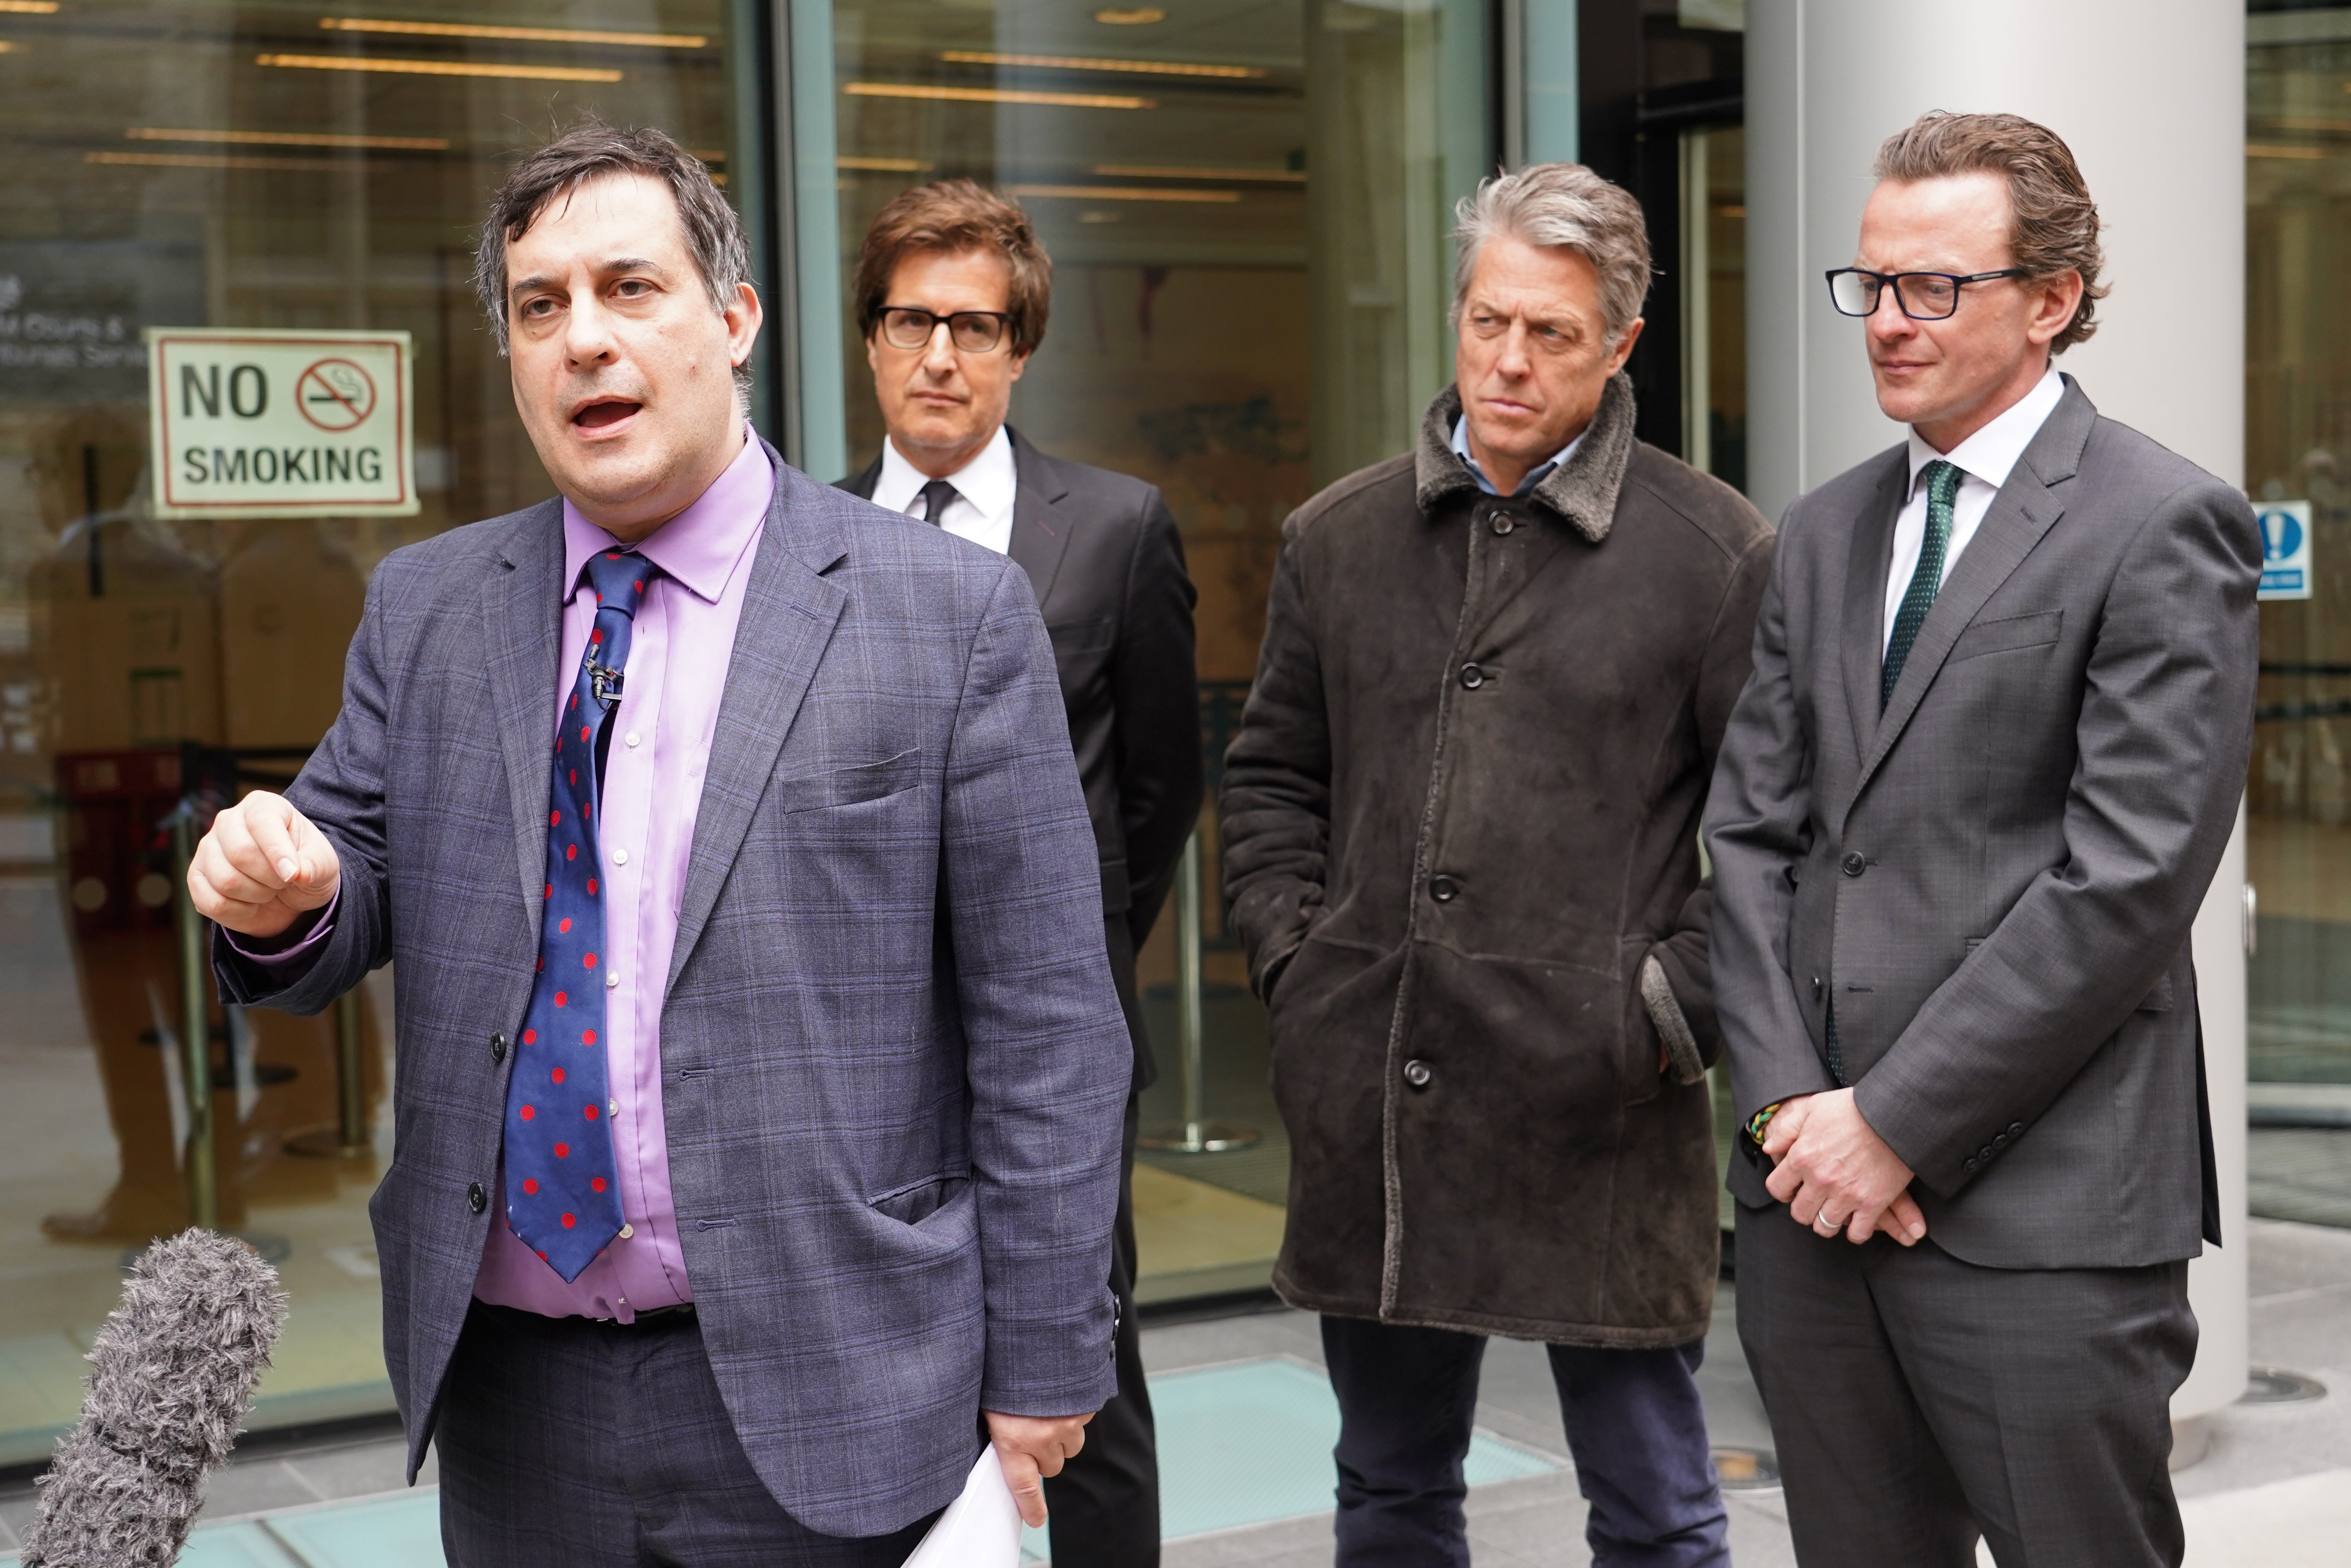 Actor Hugh Grant looks on as campaigner Dr Evan Harris speaks to the media after settling a legal action against News Group Newspapers over phone hacking claims (Ian West/PA)